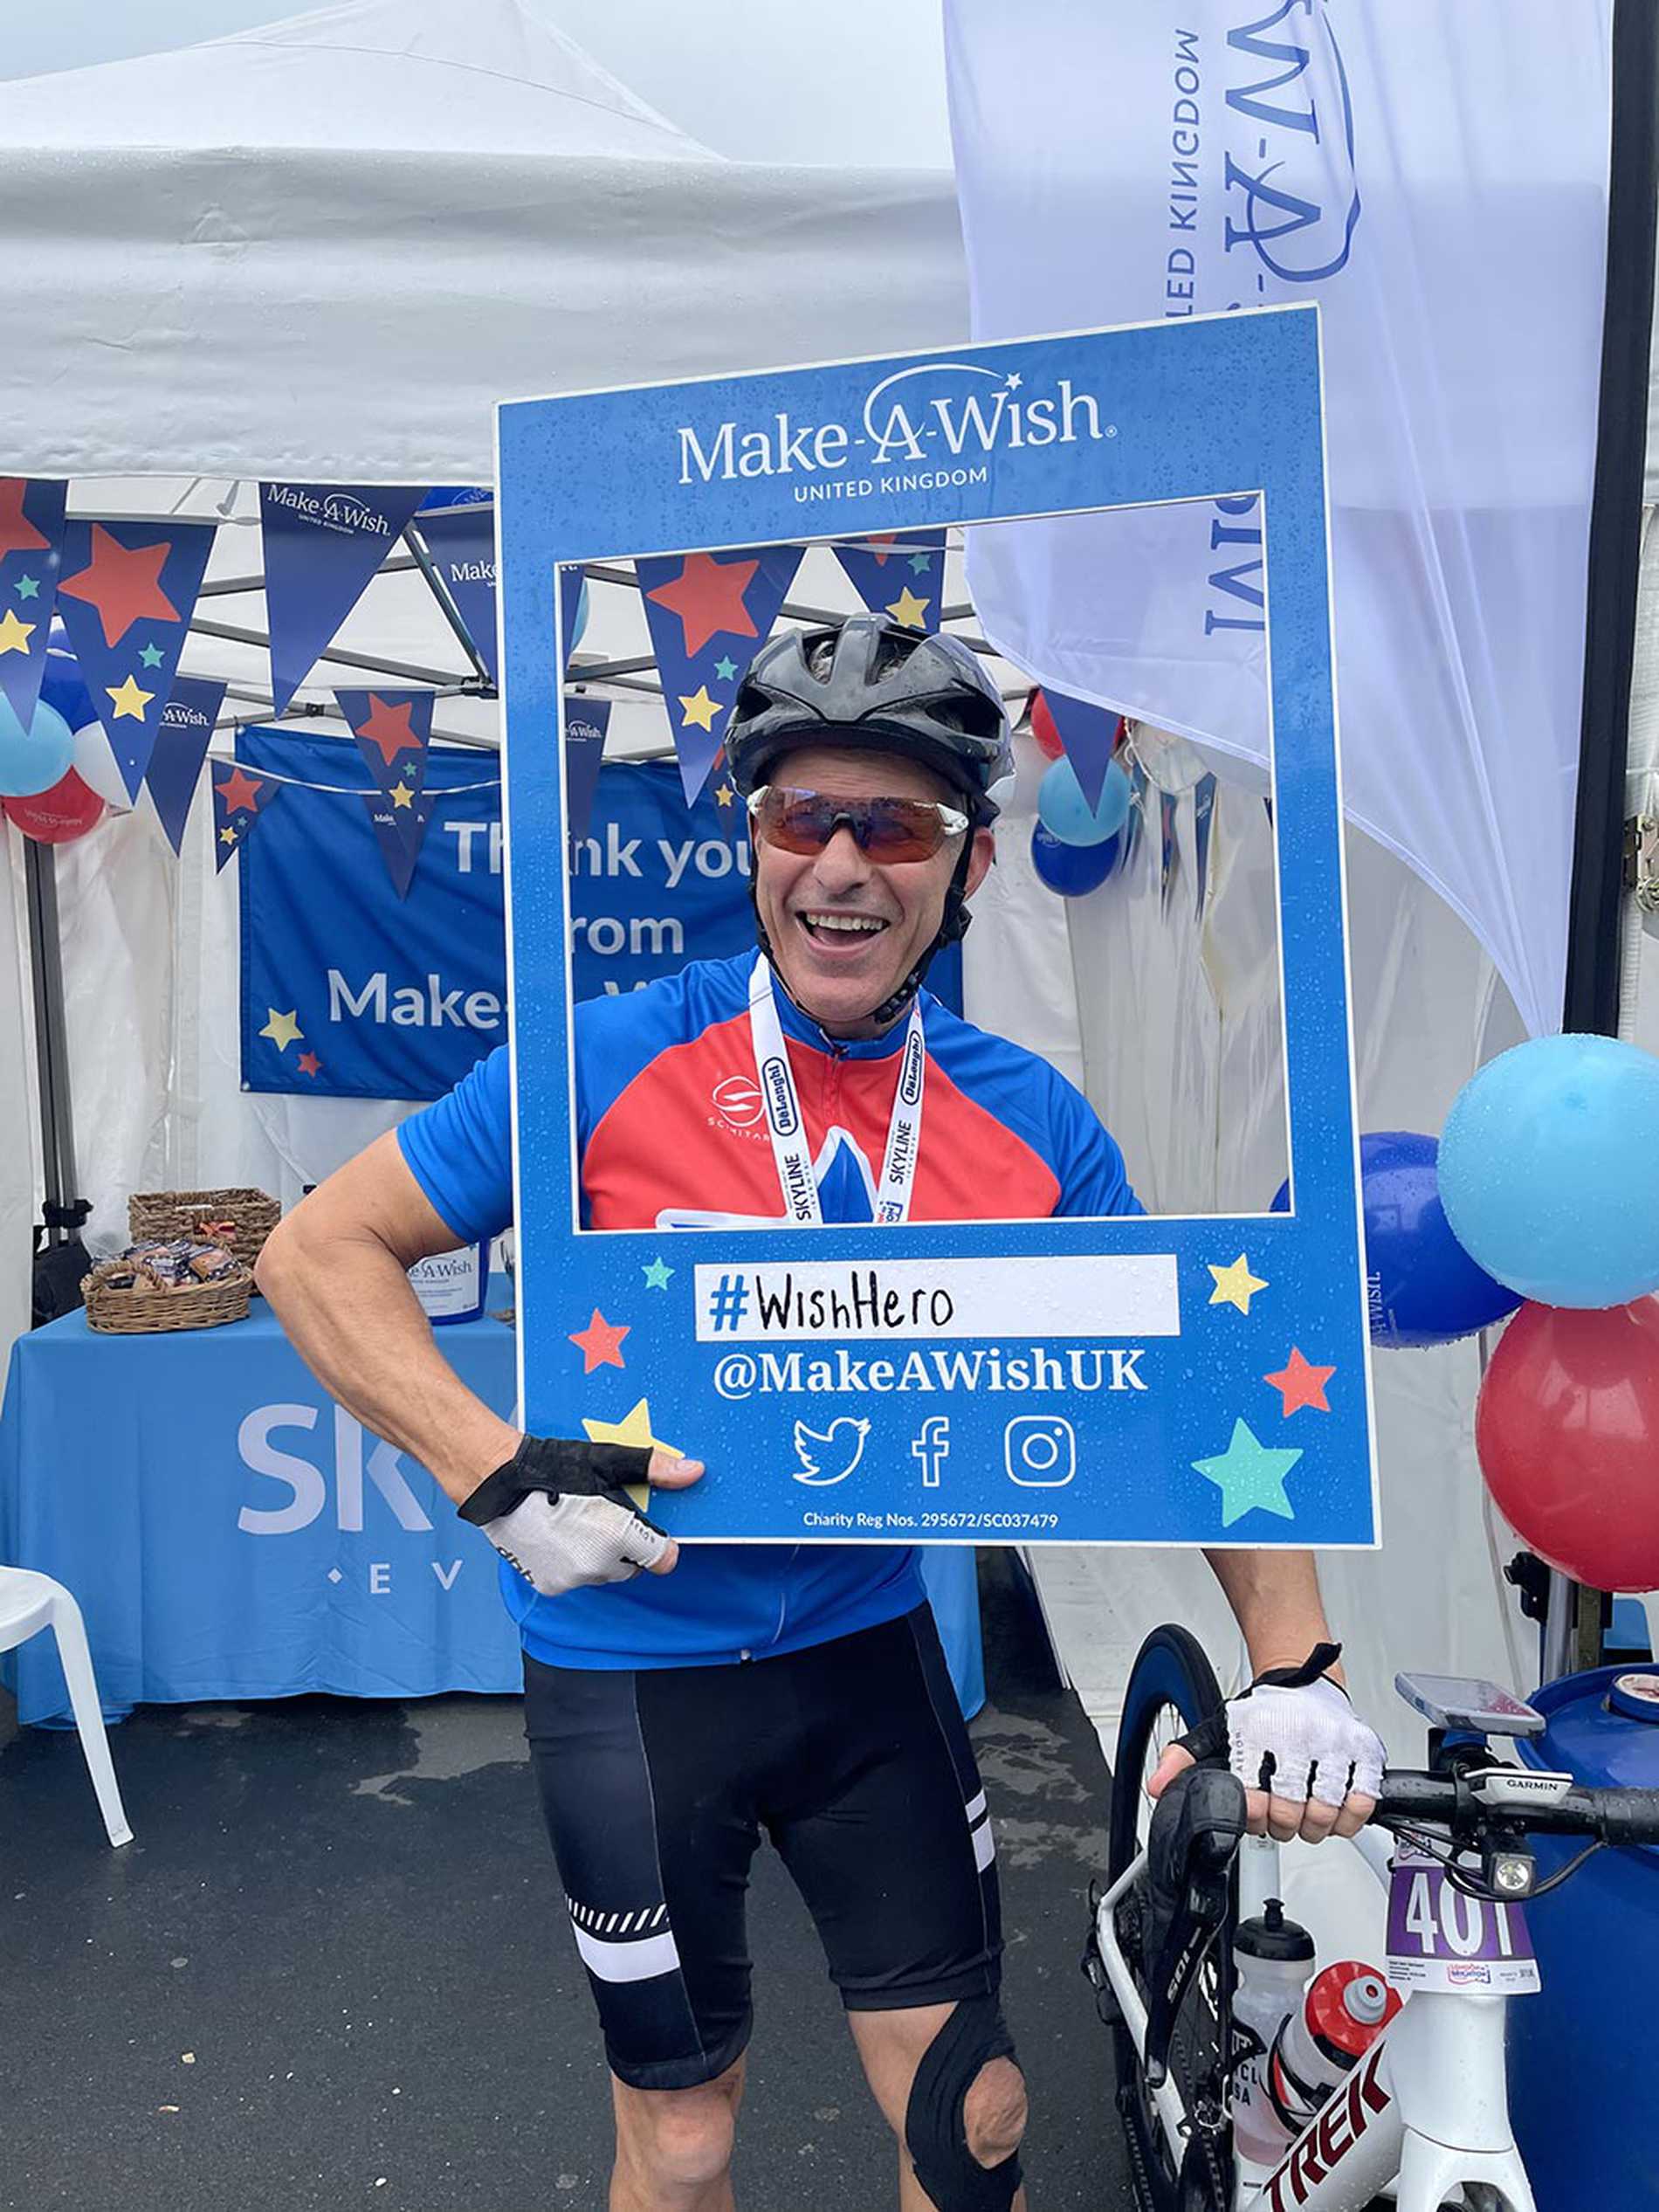 A #WishHero posing with a Make-A-Wish selfie frame after completing the 2021 London to Brighton Cycle challenge.